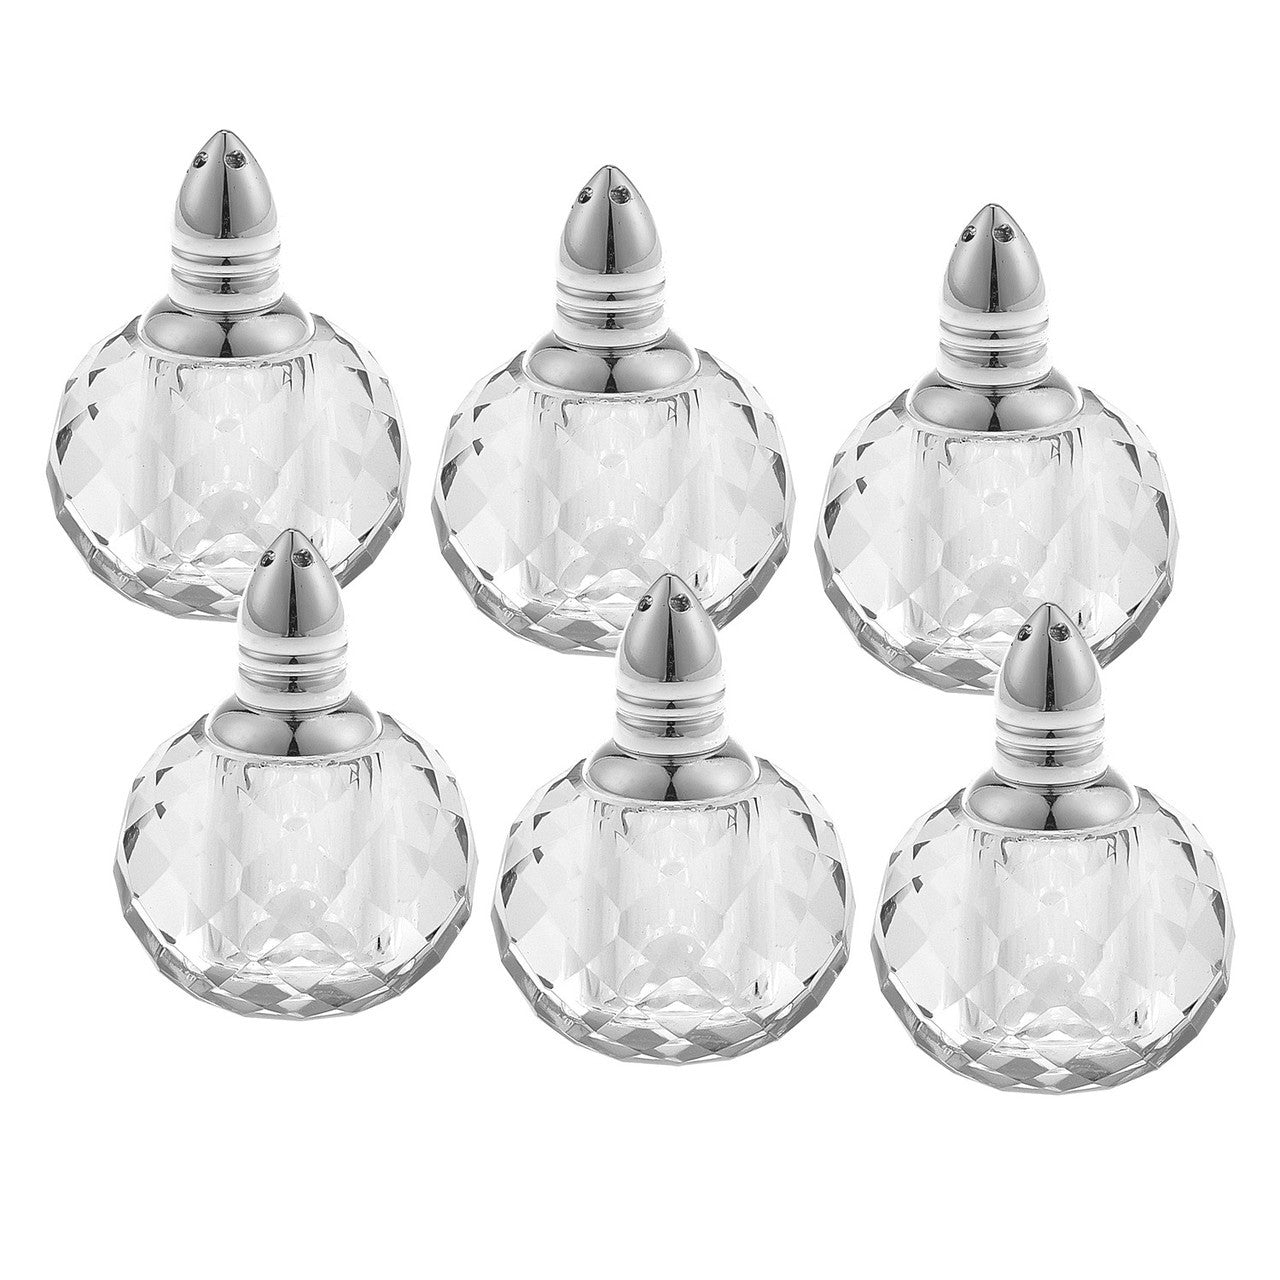 Zendra Adorable Glass Salt and Pepper Shakers Set of 6